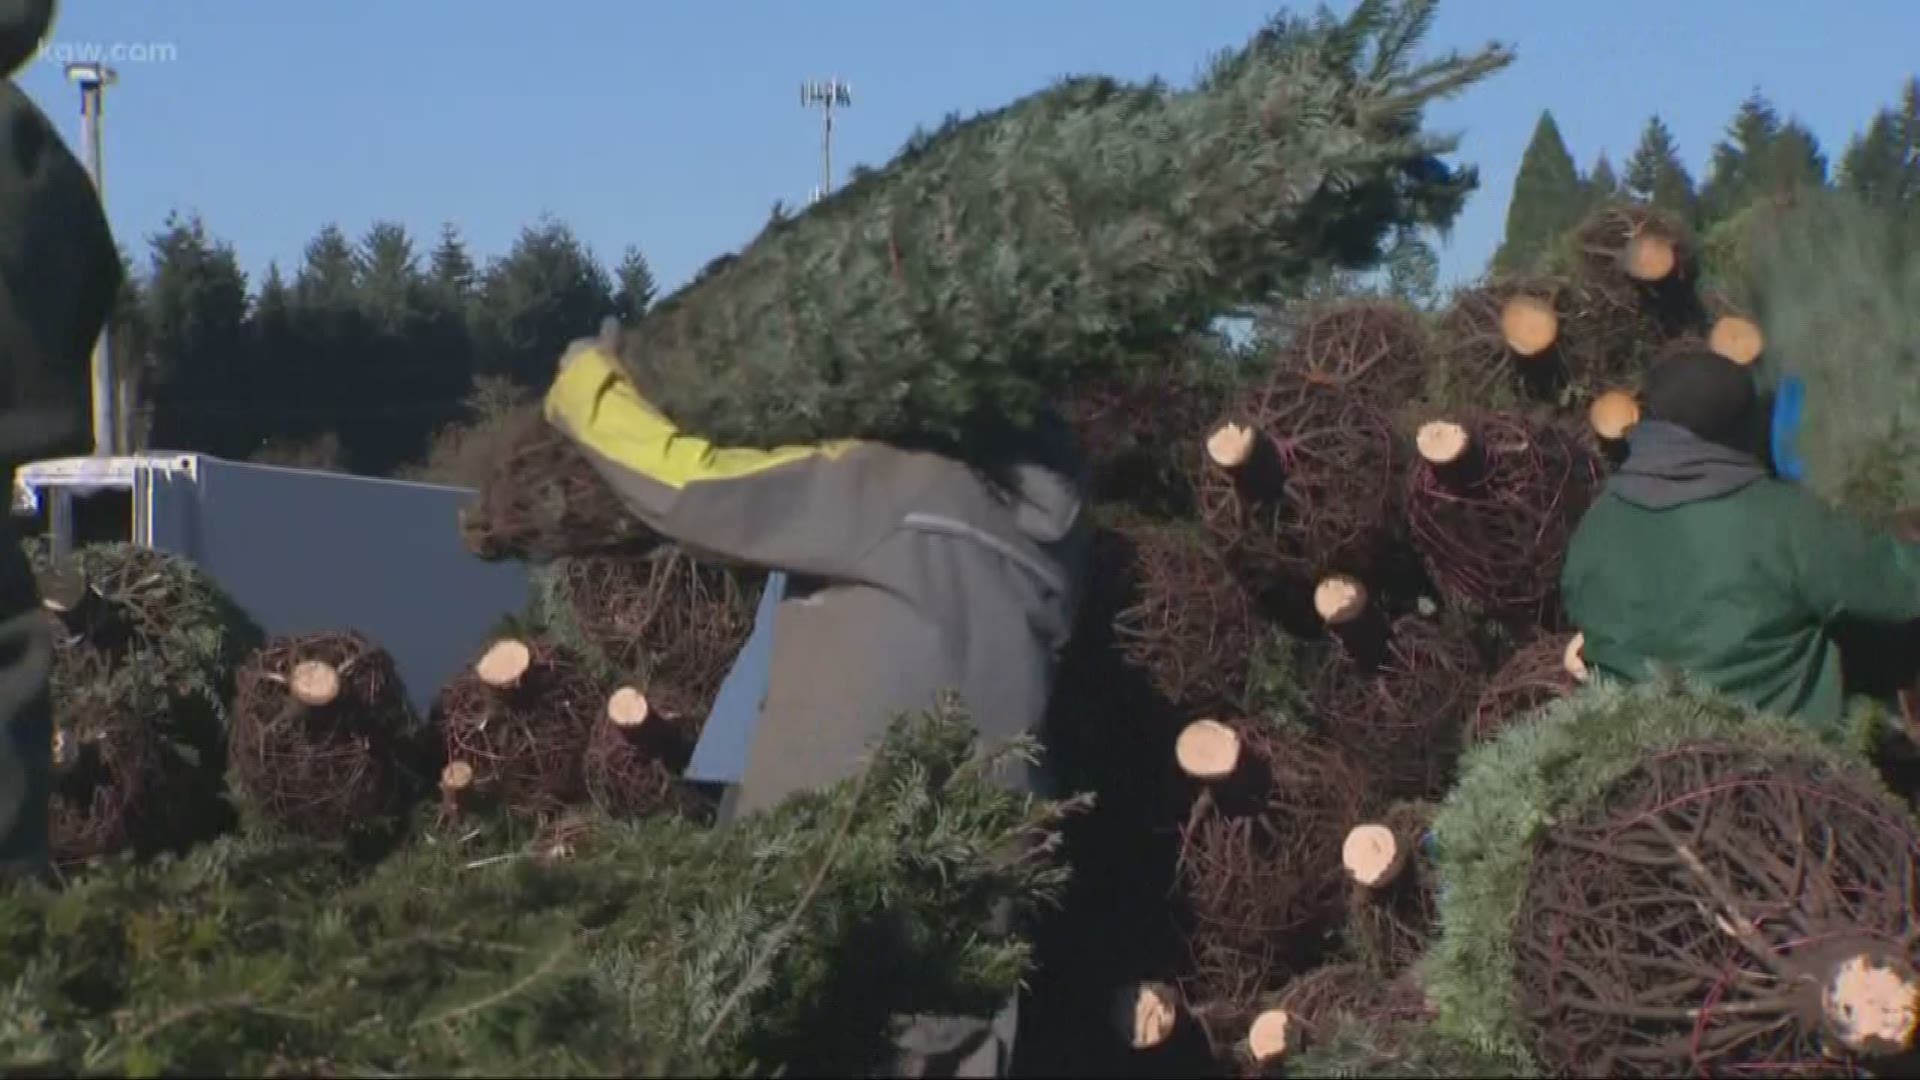 A Christmas tree shortage is affecting tree prices.